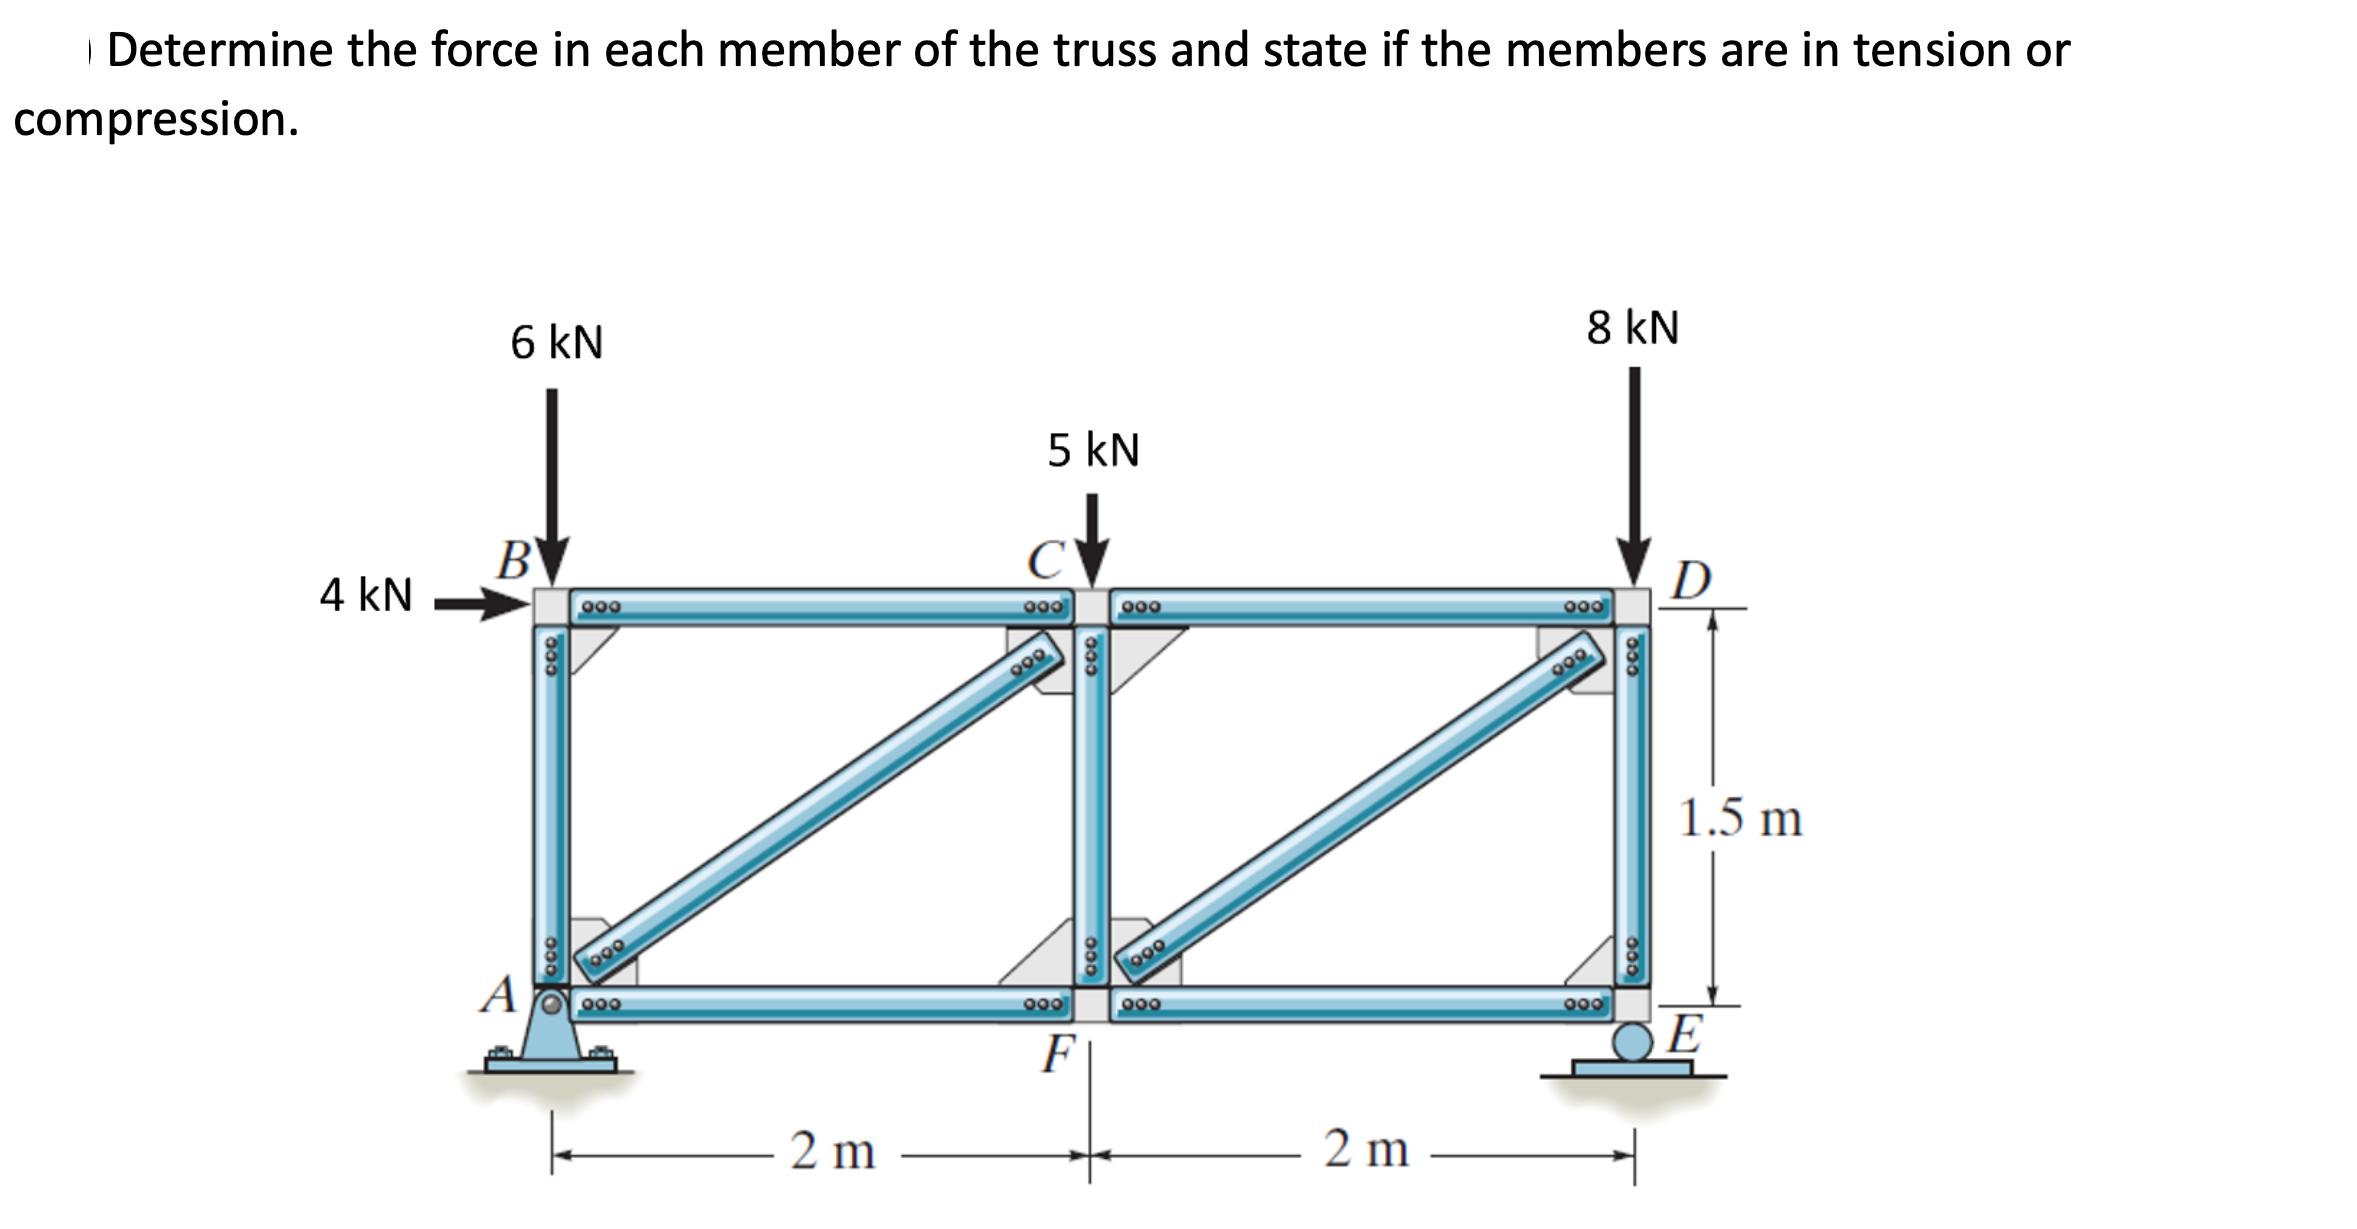 Determine the force in each member of the truss and state if the members are in tension or compression. 4 KN